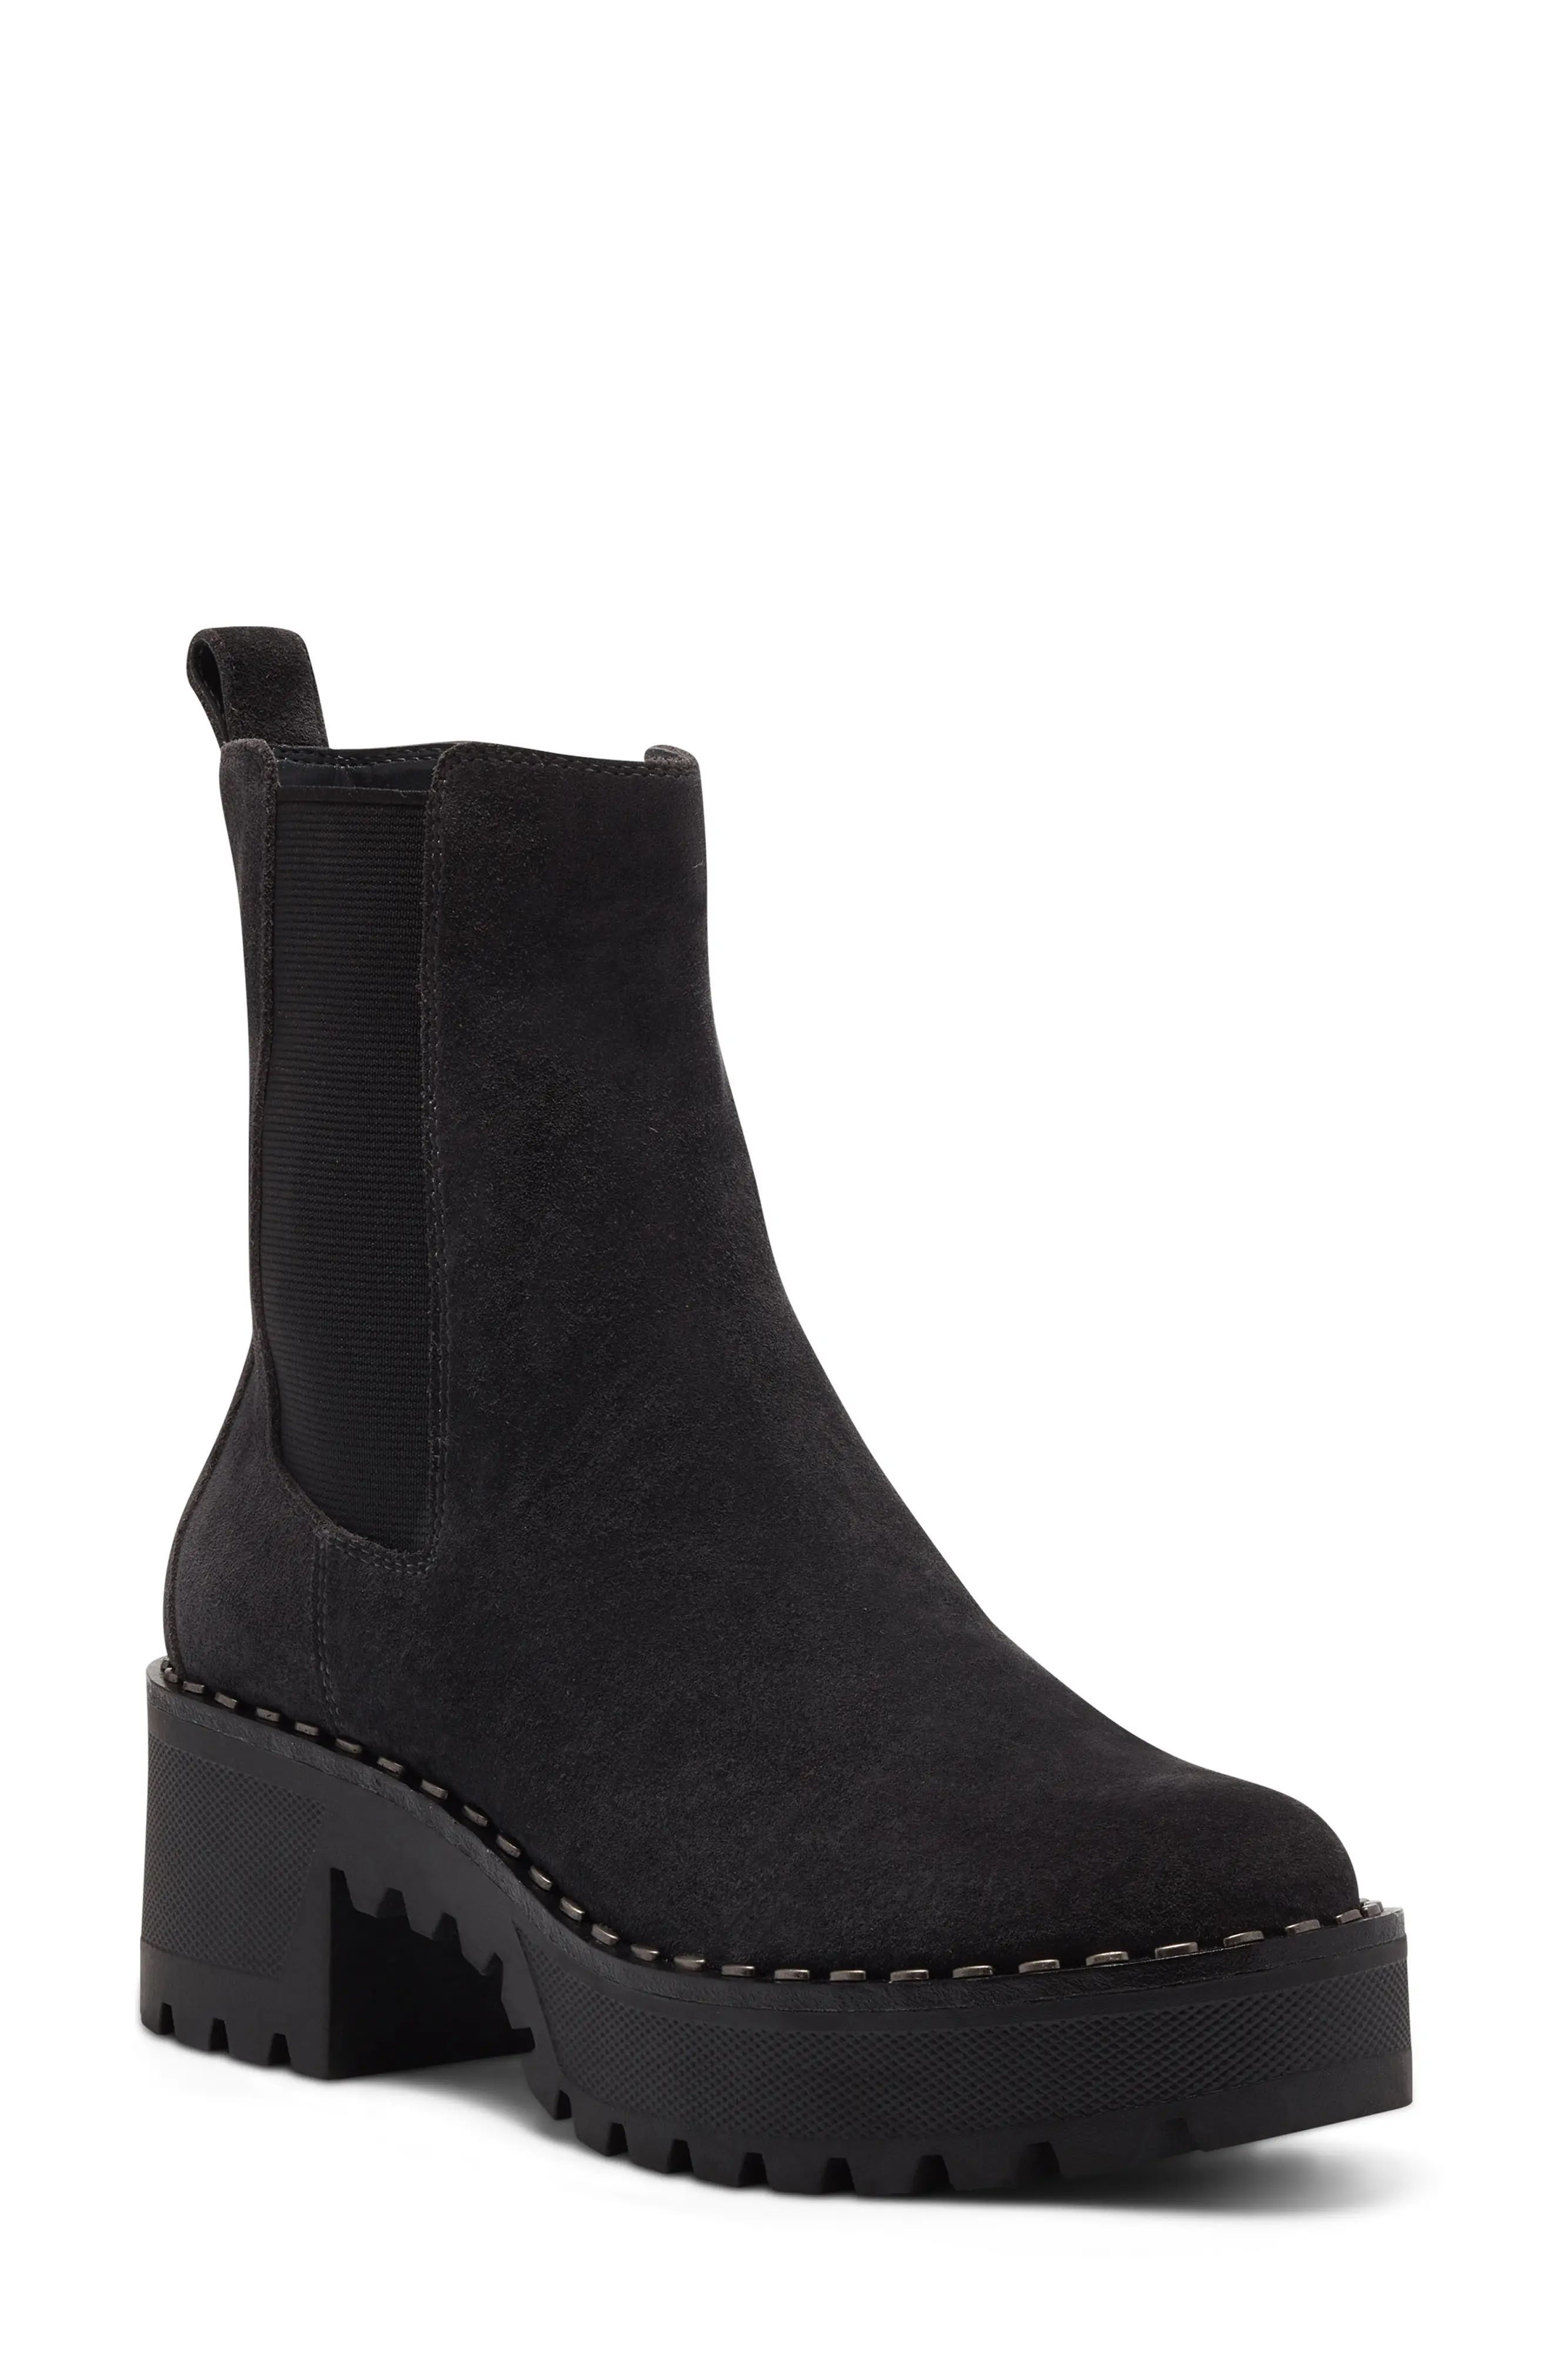 Vince Camuto Madisha Chelsea Boot, Size 8 in Thunder at Nordstrom | Nordstrom